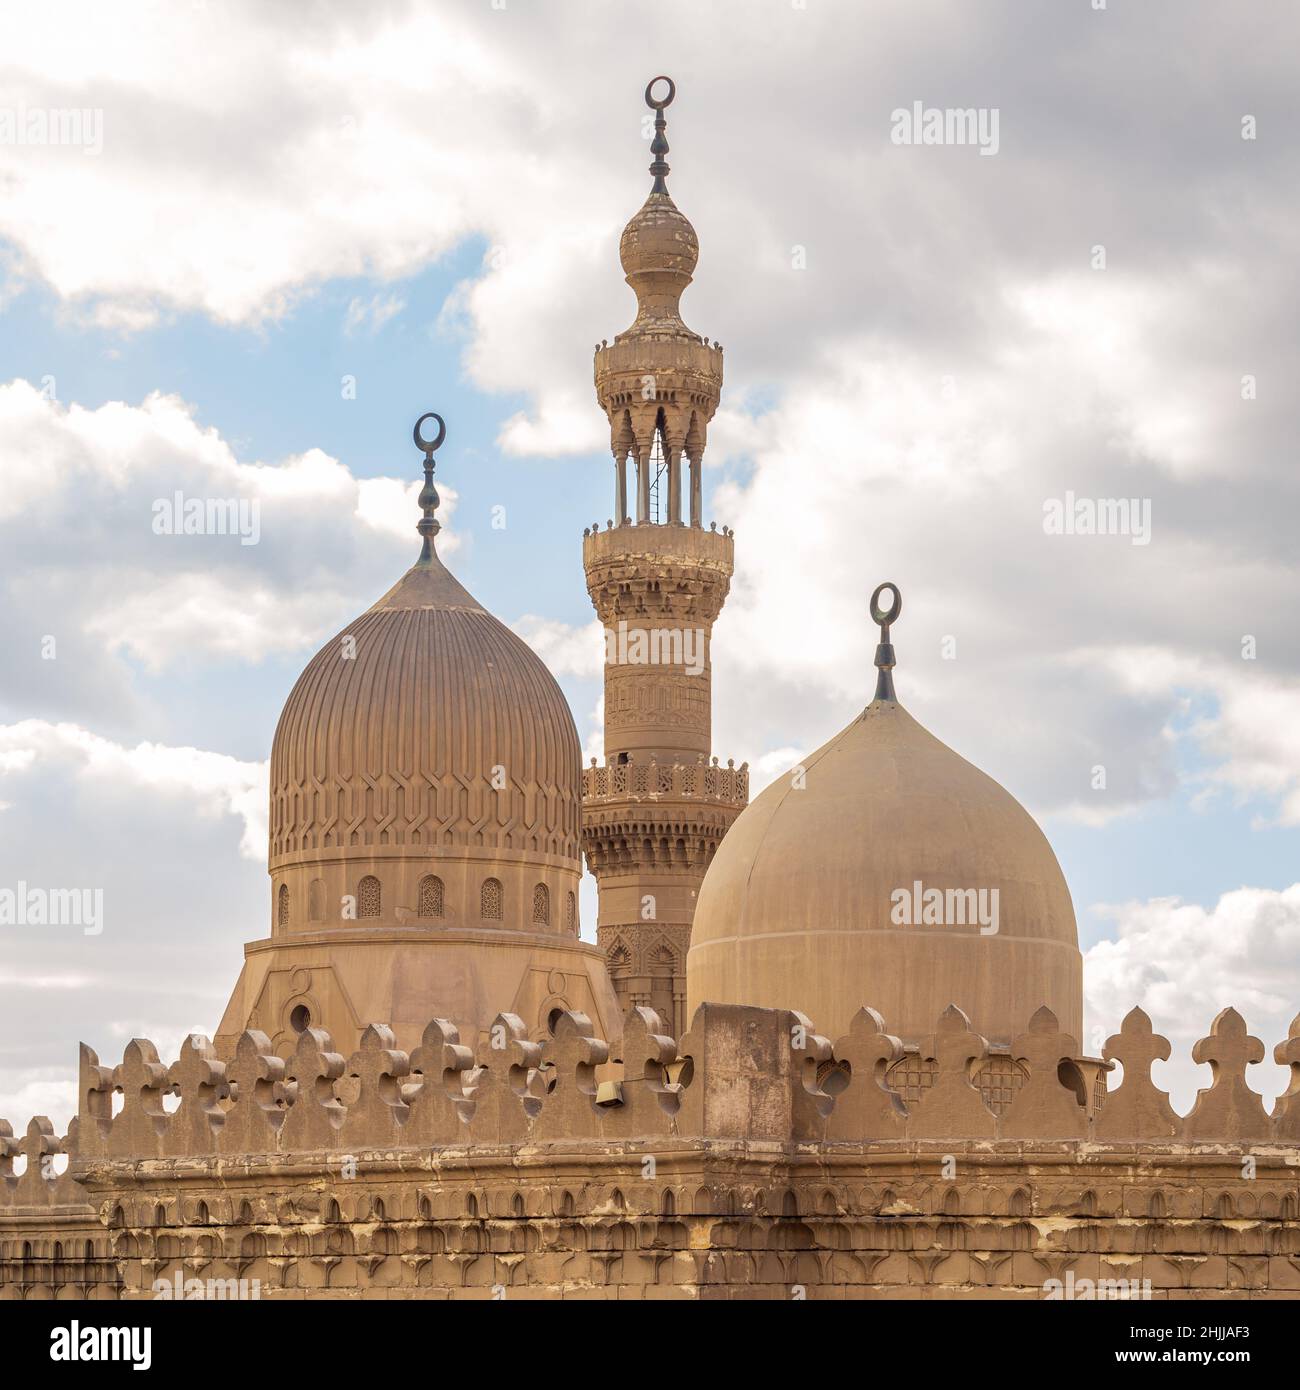 The Minarets and dome of Al Rifai Mosque, Cairo, Egypt with cloudy sky Stock Photo